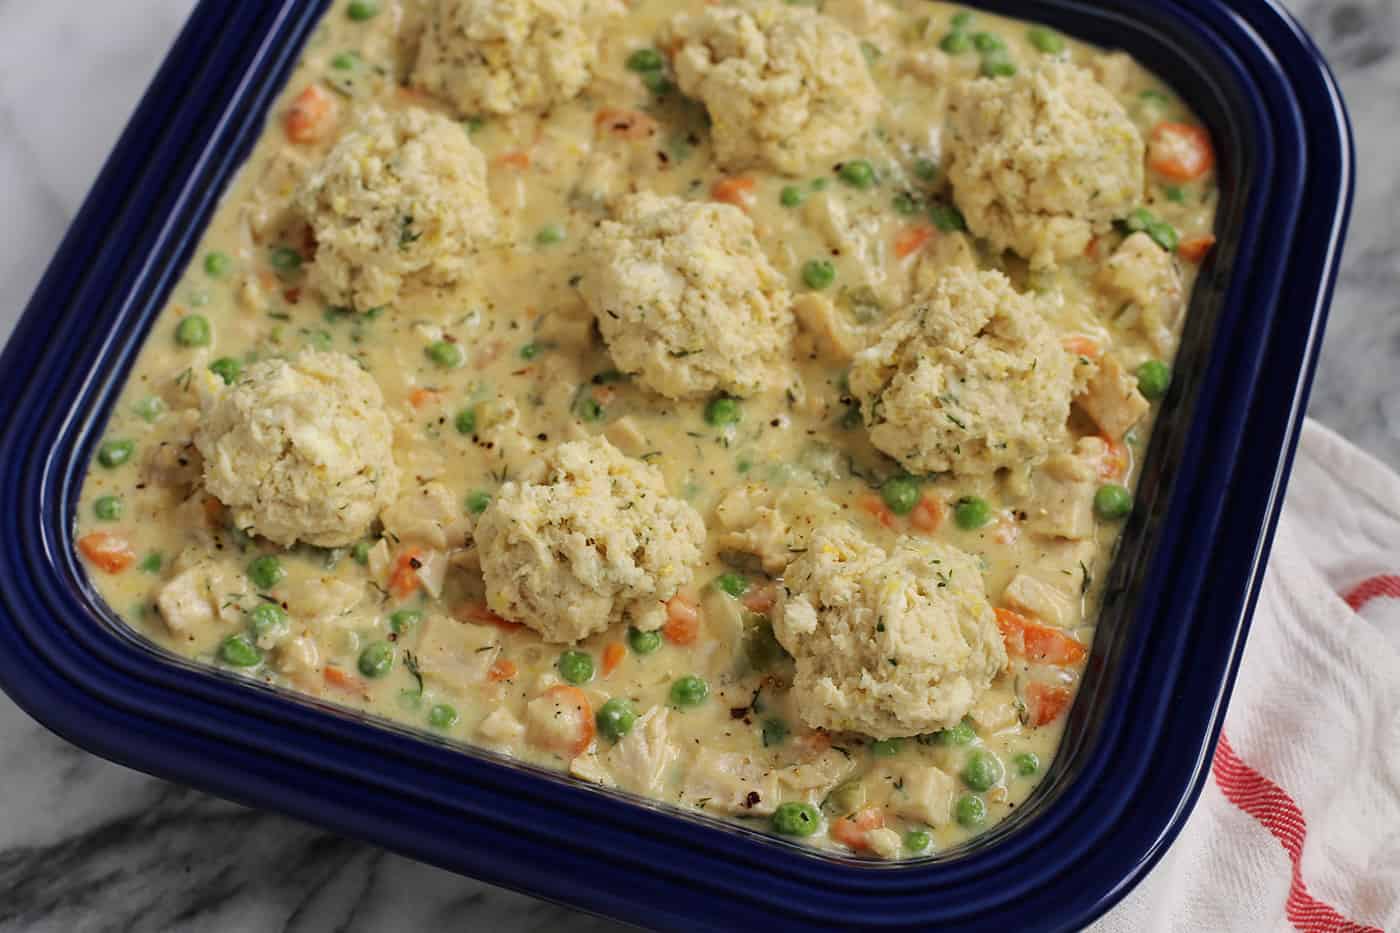 Turkey and biscuits casserole in a square baking dish